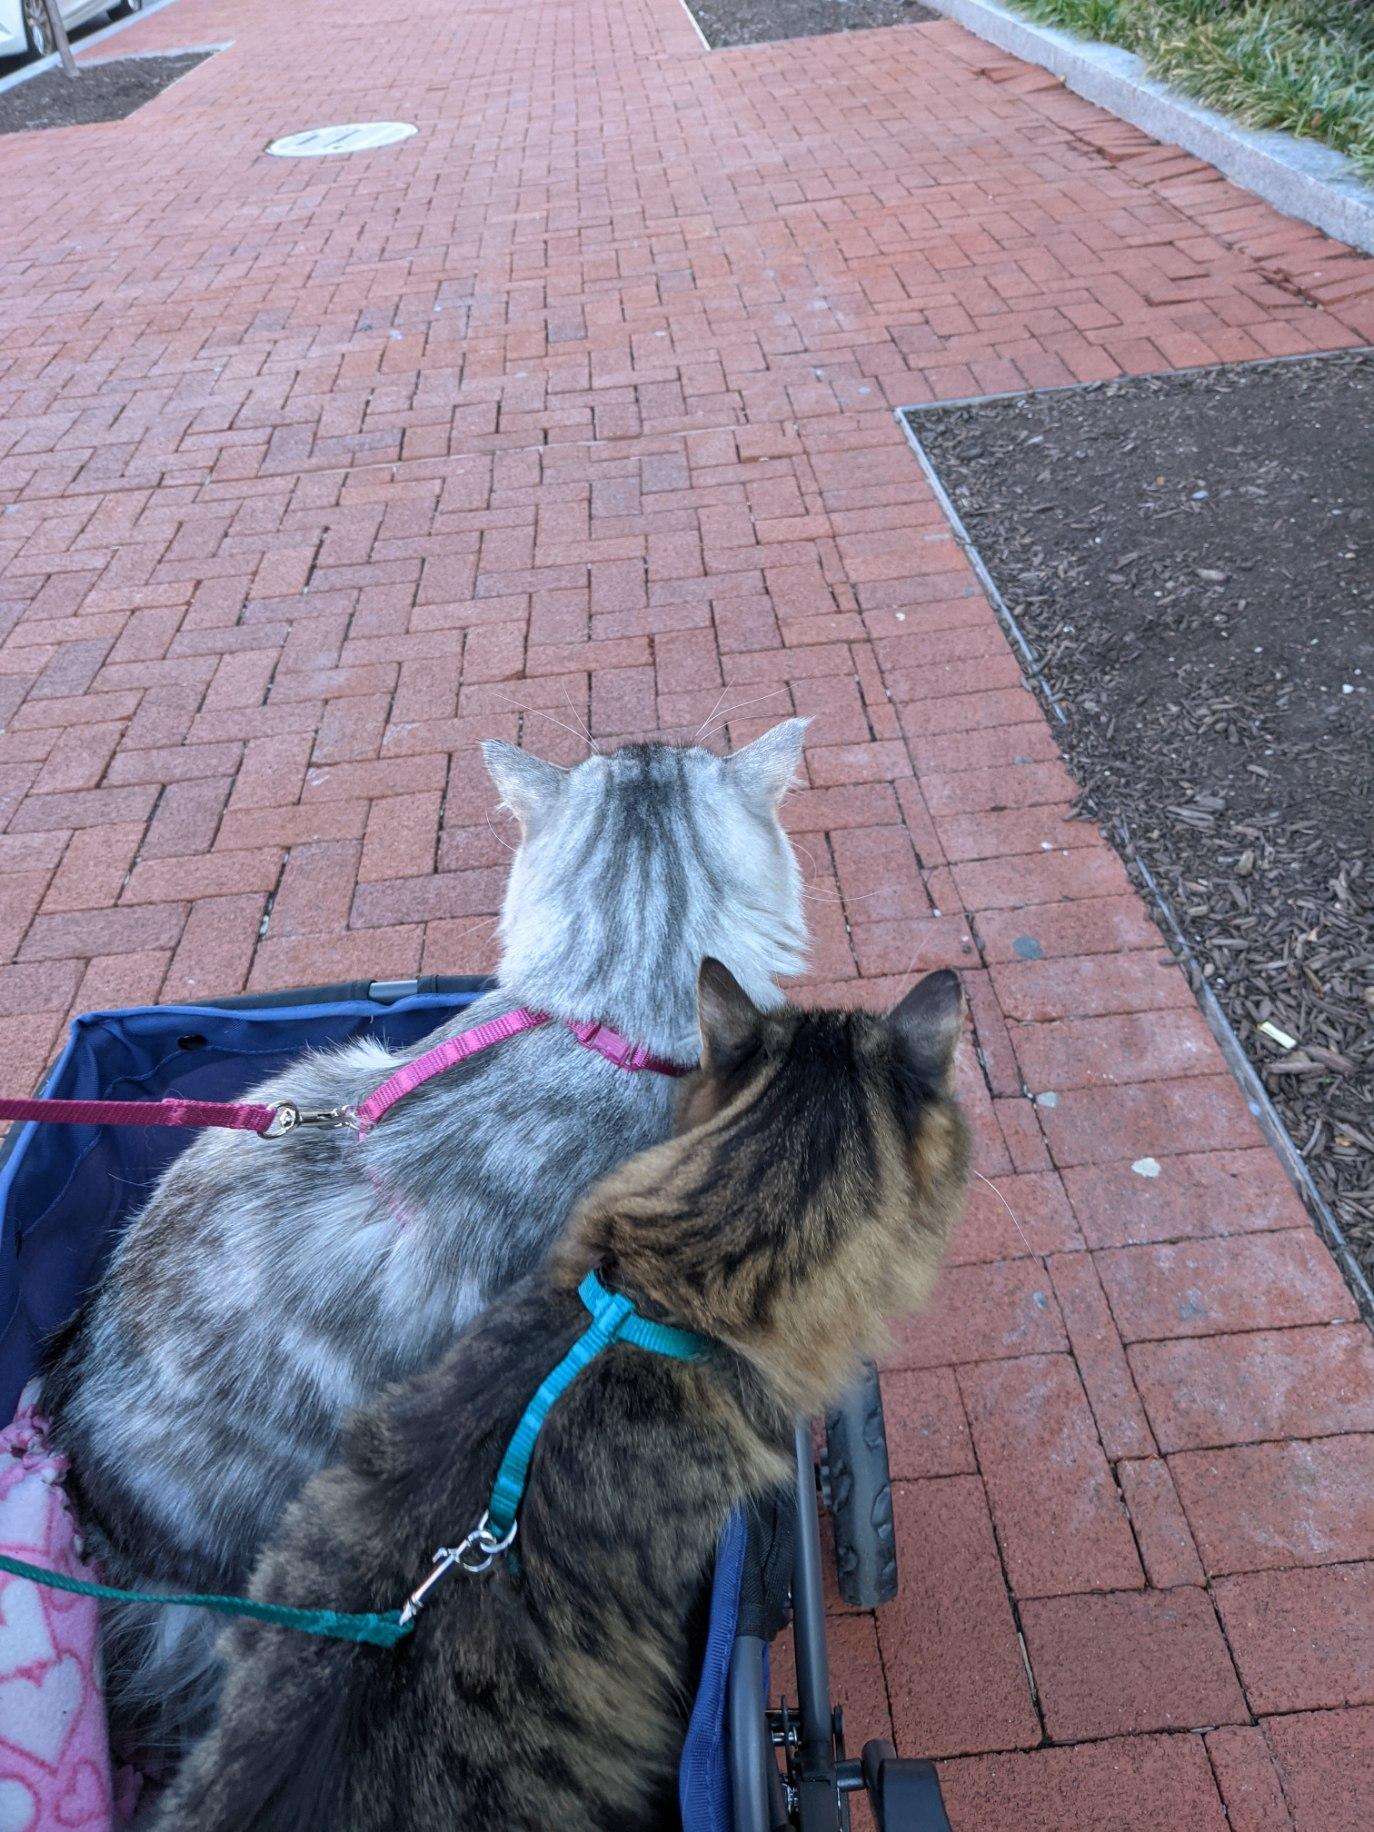 Rosie and Kittleson on an adventure together!